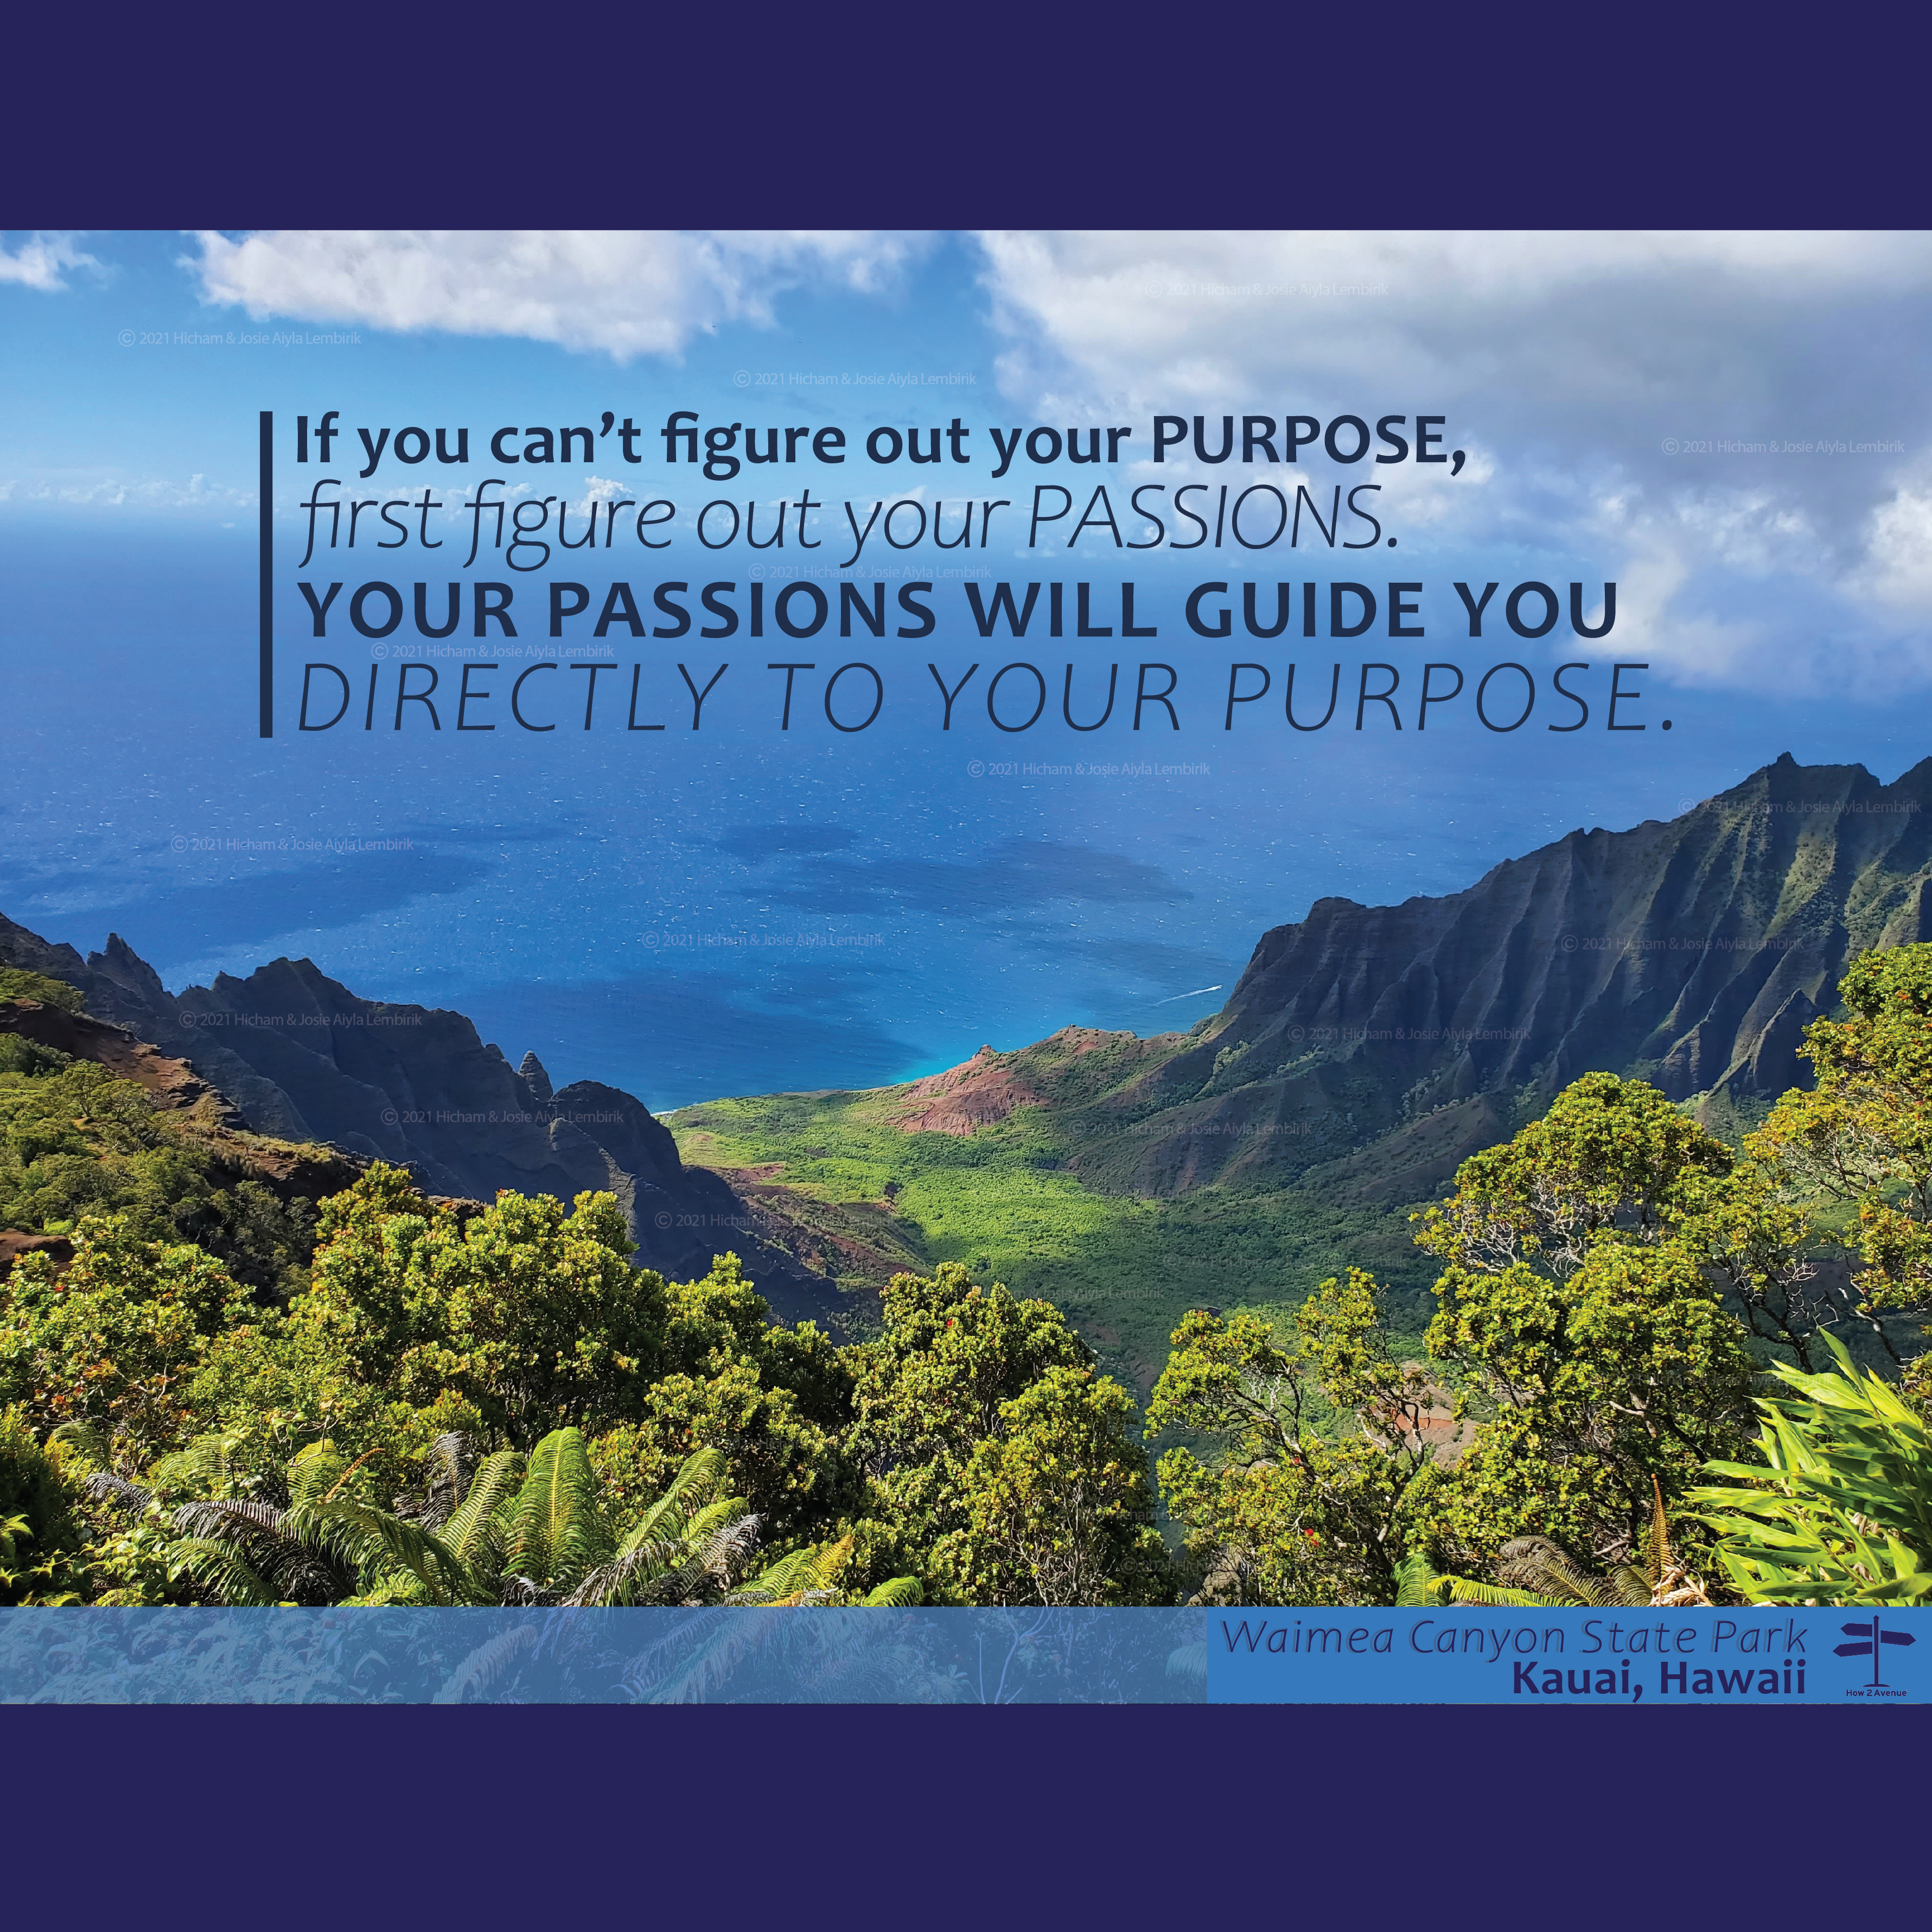 Finding Your Purpose: The Power of Passion